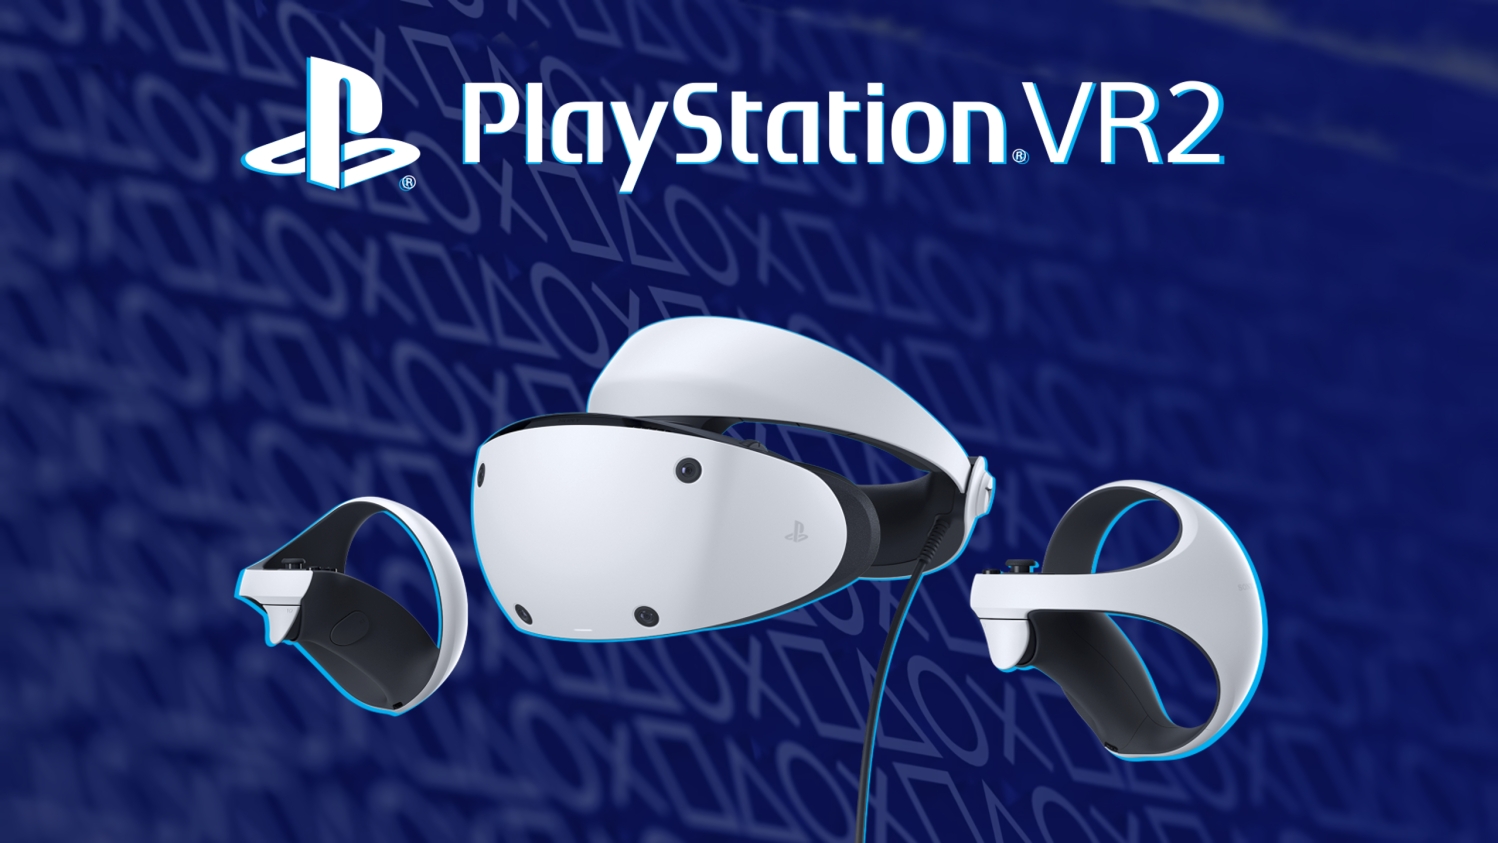 Will PSVR 2 be backwards compatible? It better be…